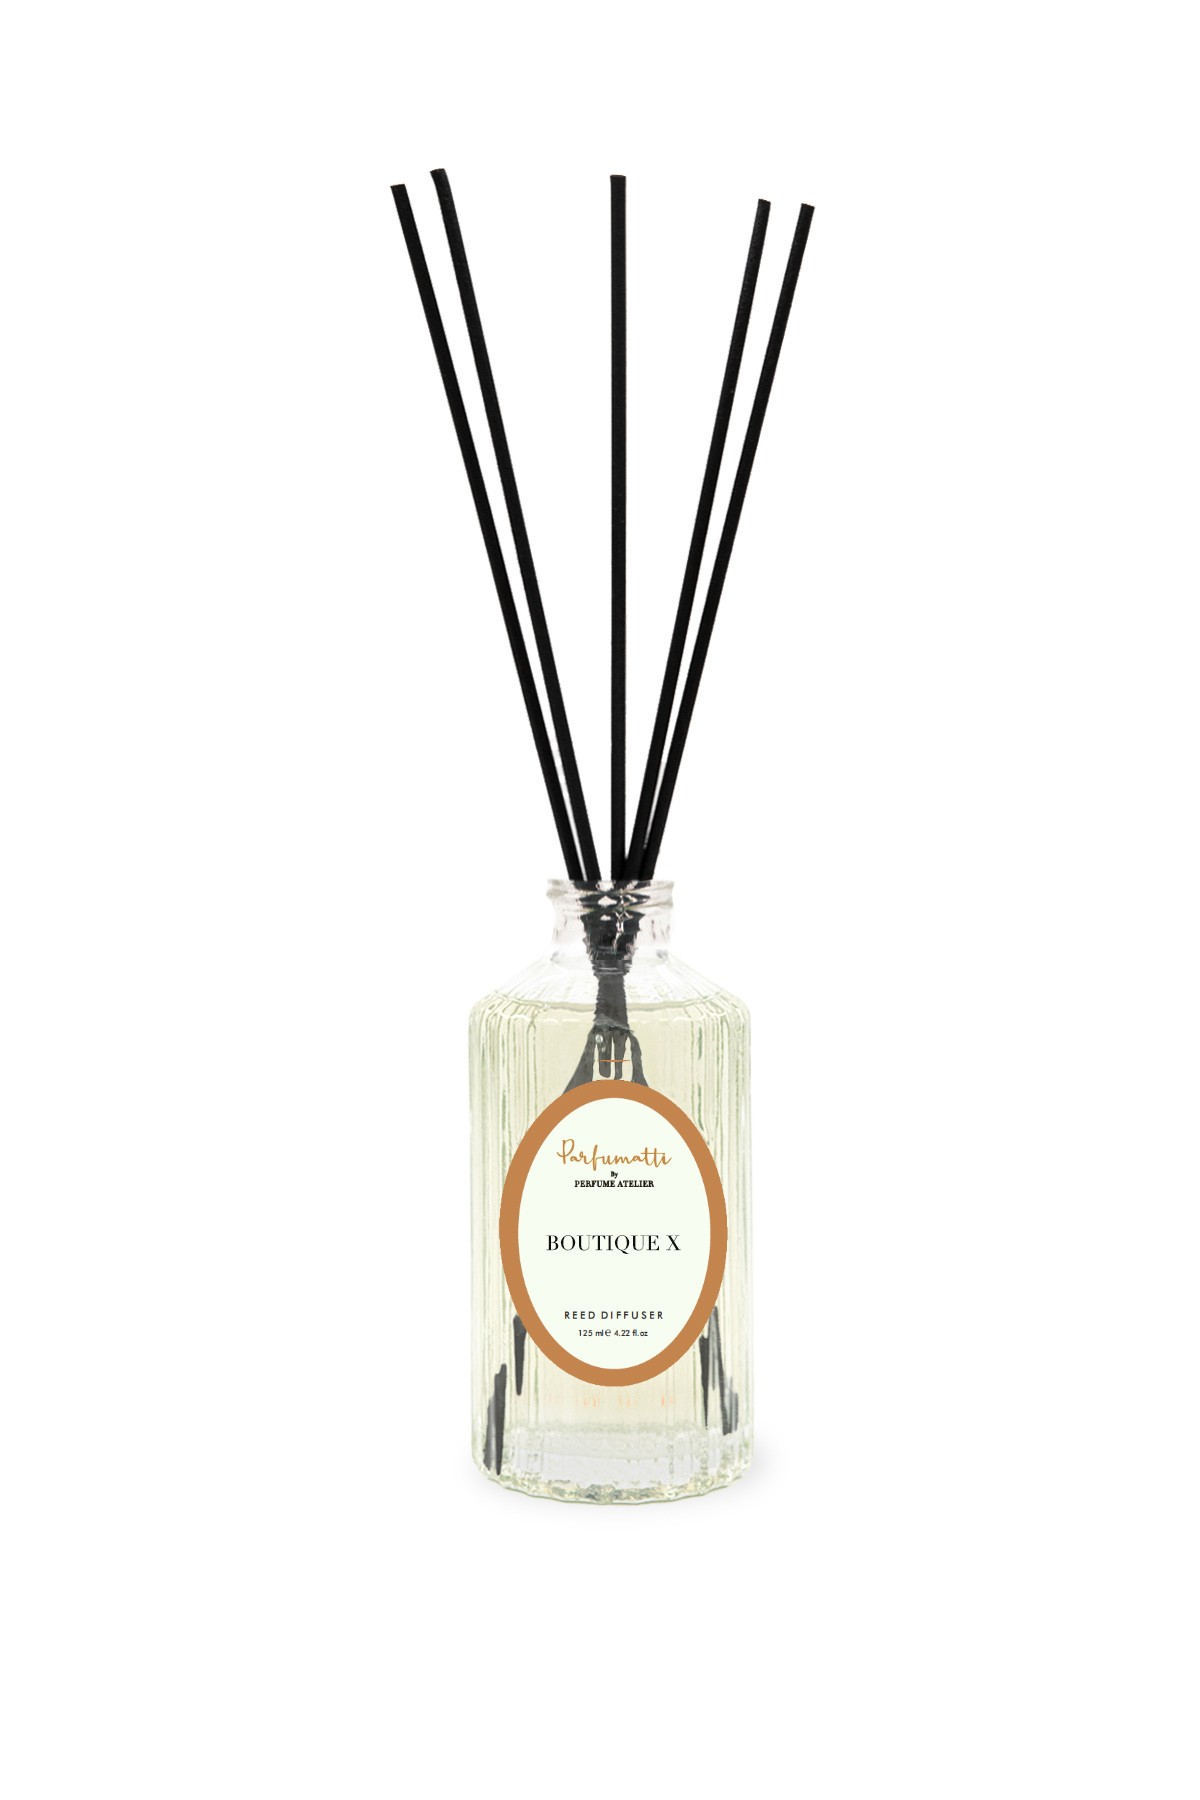 BOUTIQUE X 125 Ml Reed Diffuser image